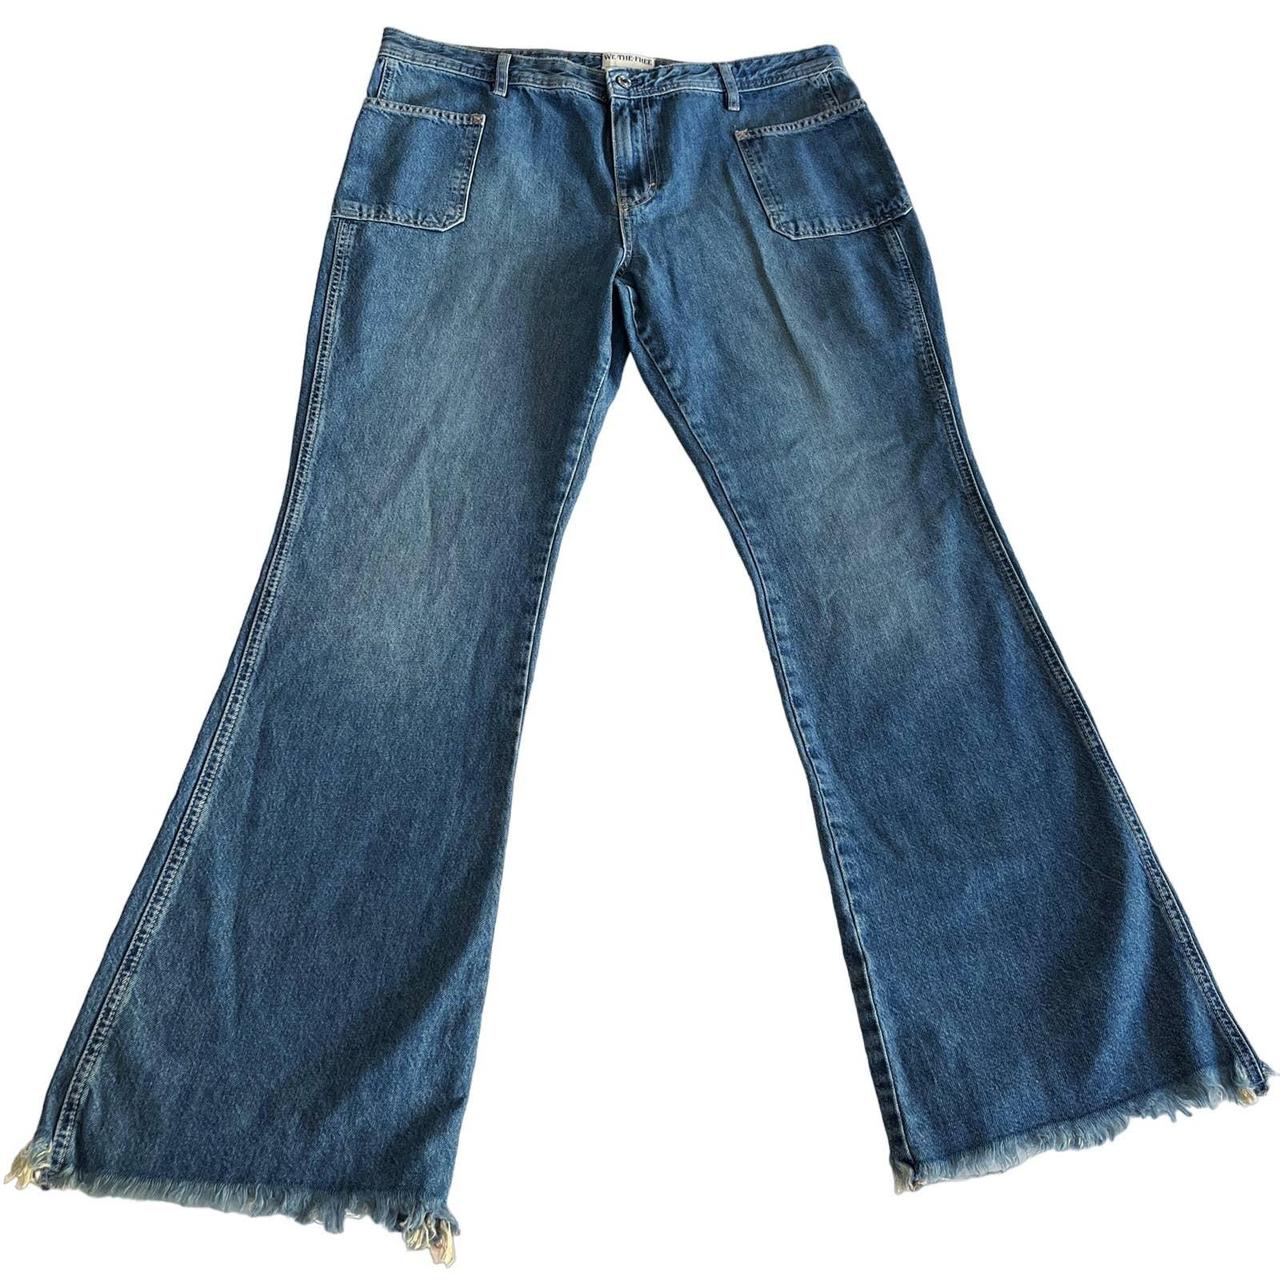 Free People Low-rise Flare Jeans in Blue